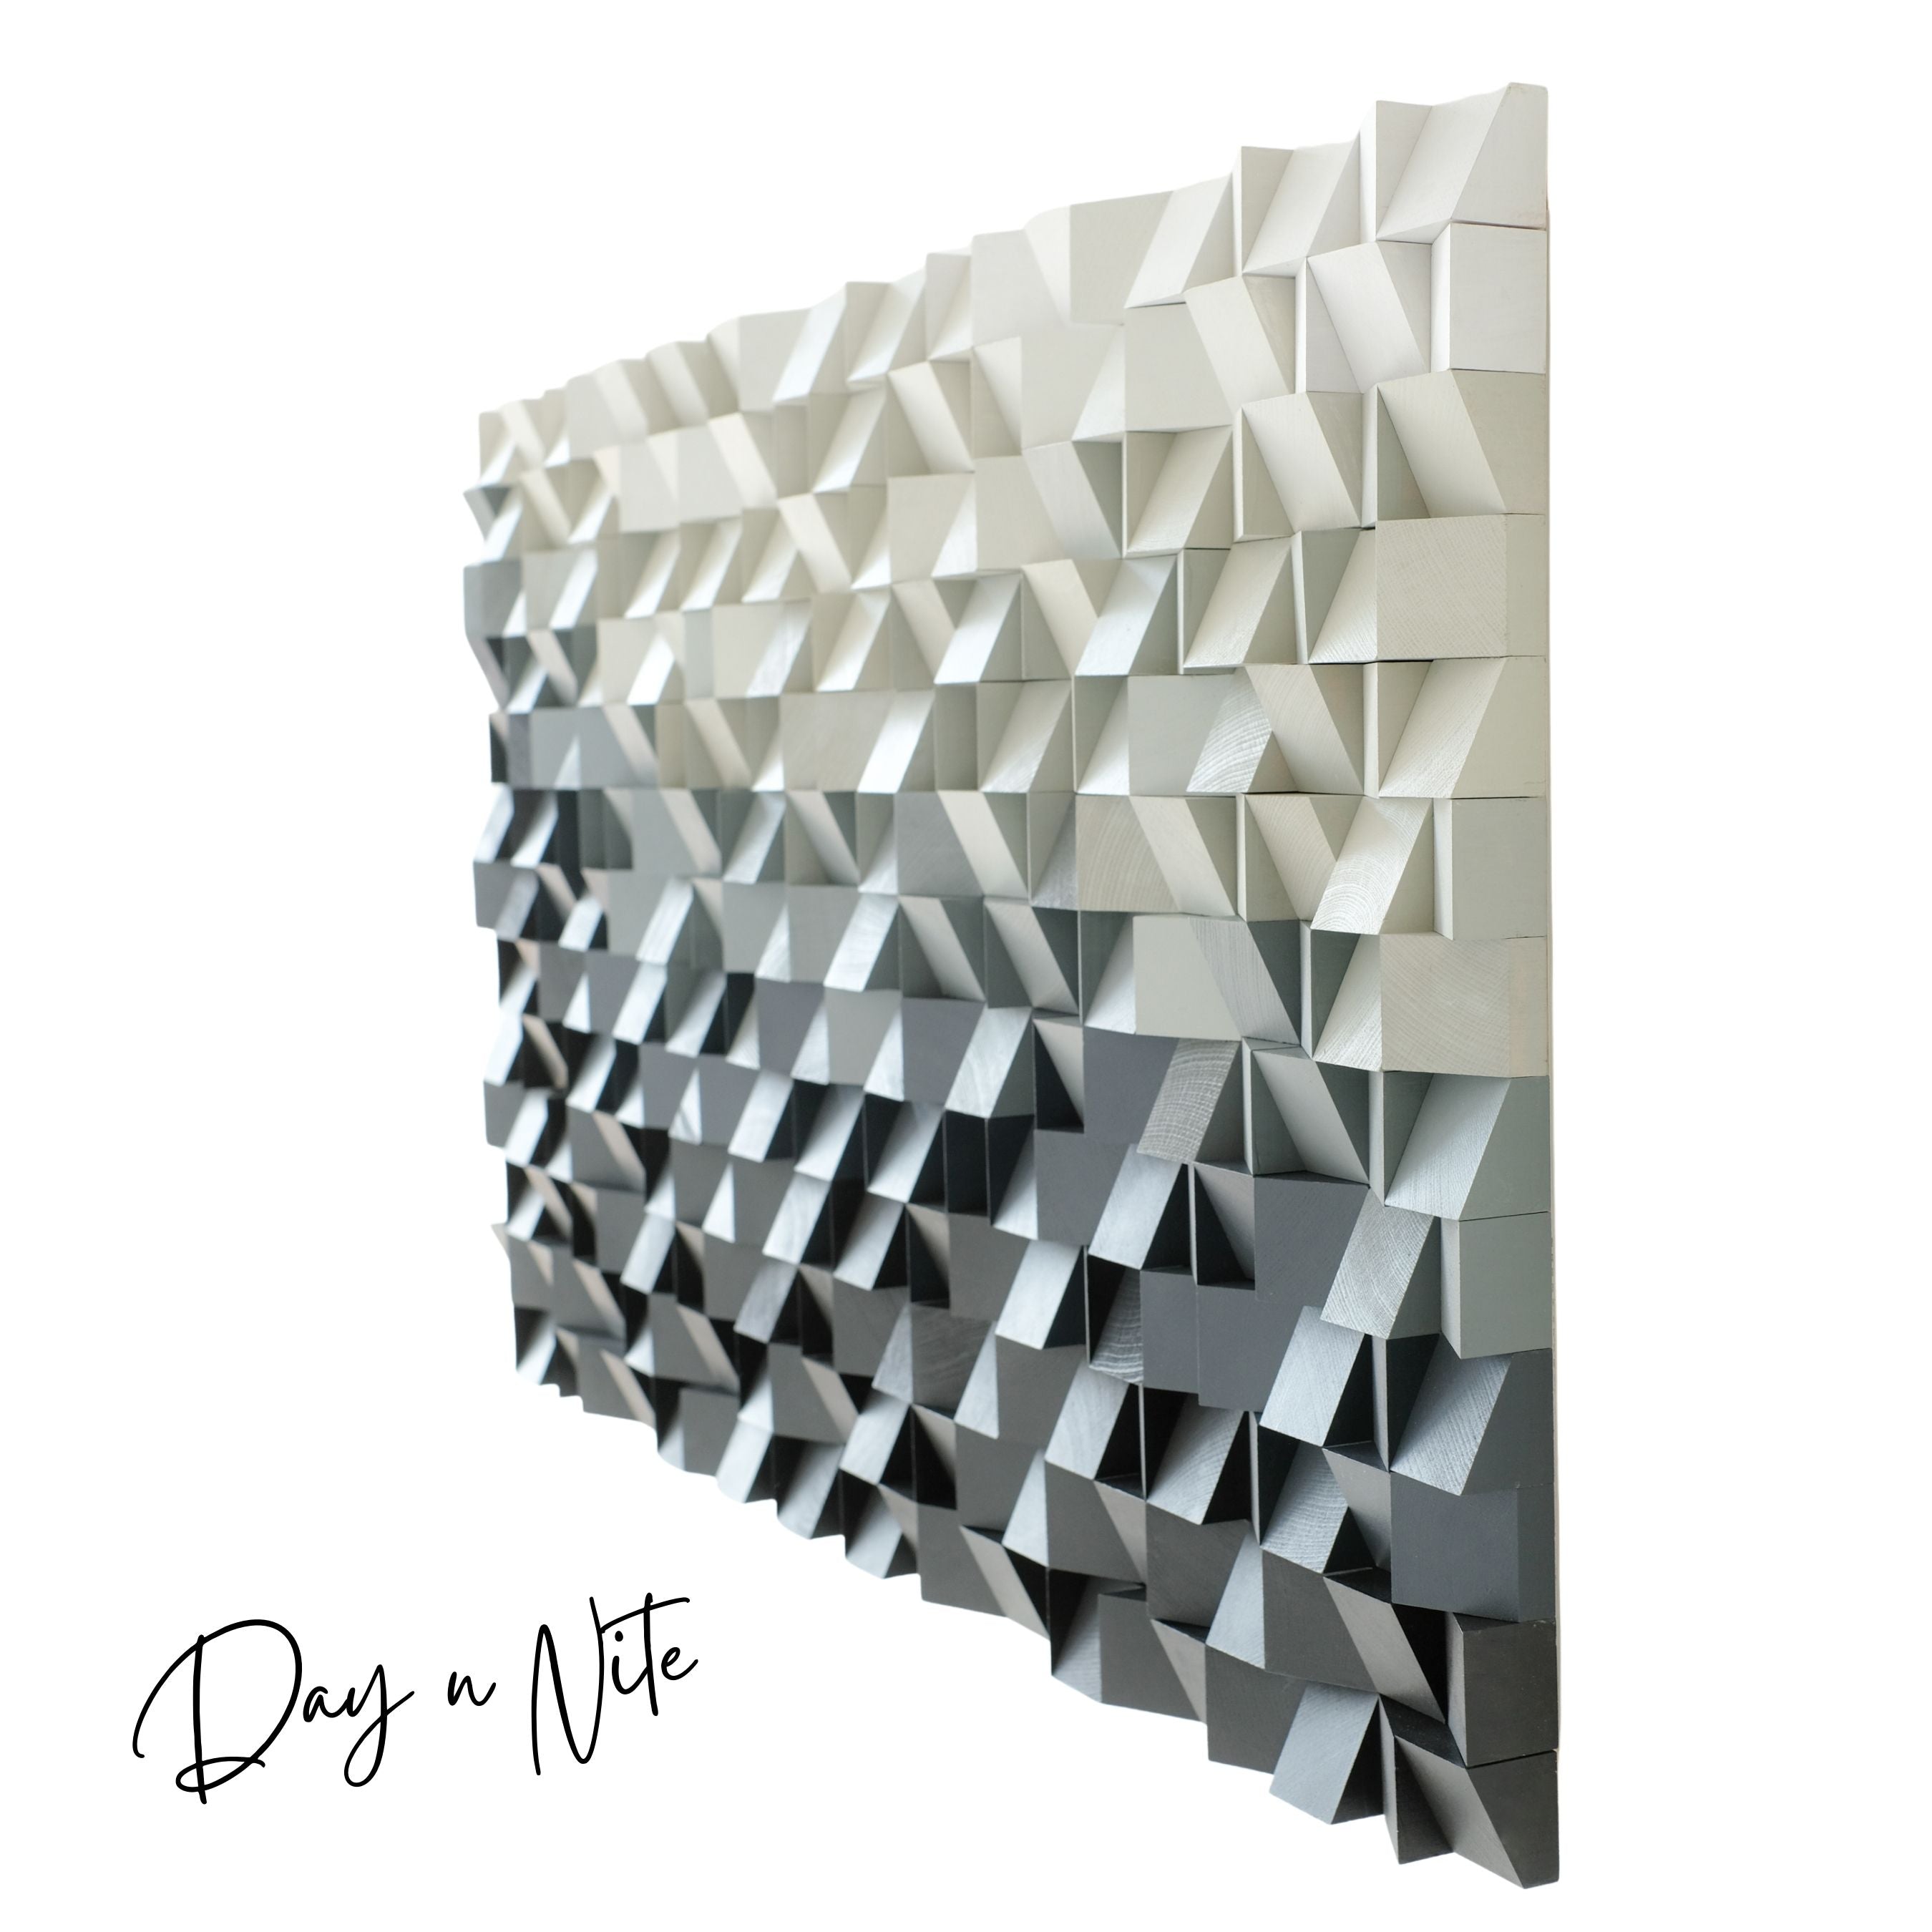 ・"Day N Nite"・Premium Wood Handmade Wall Sculpture - Limited Edition